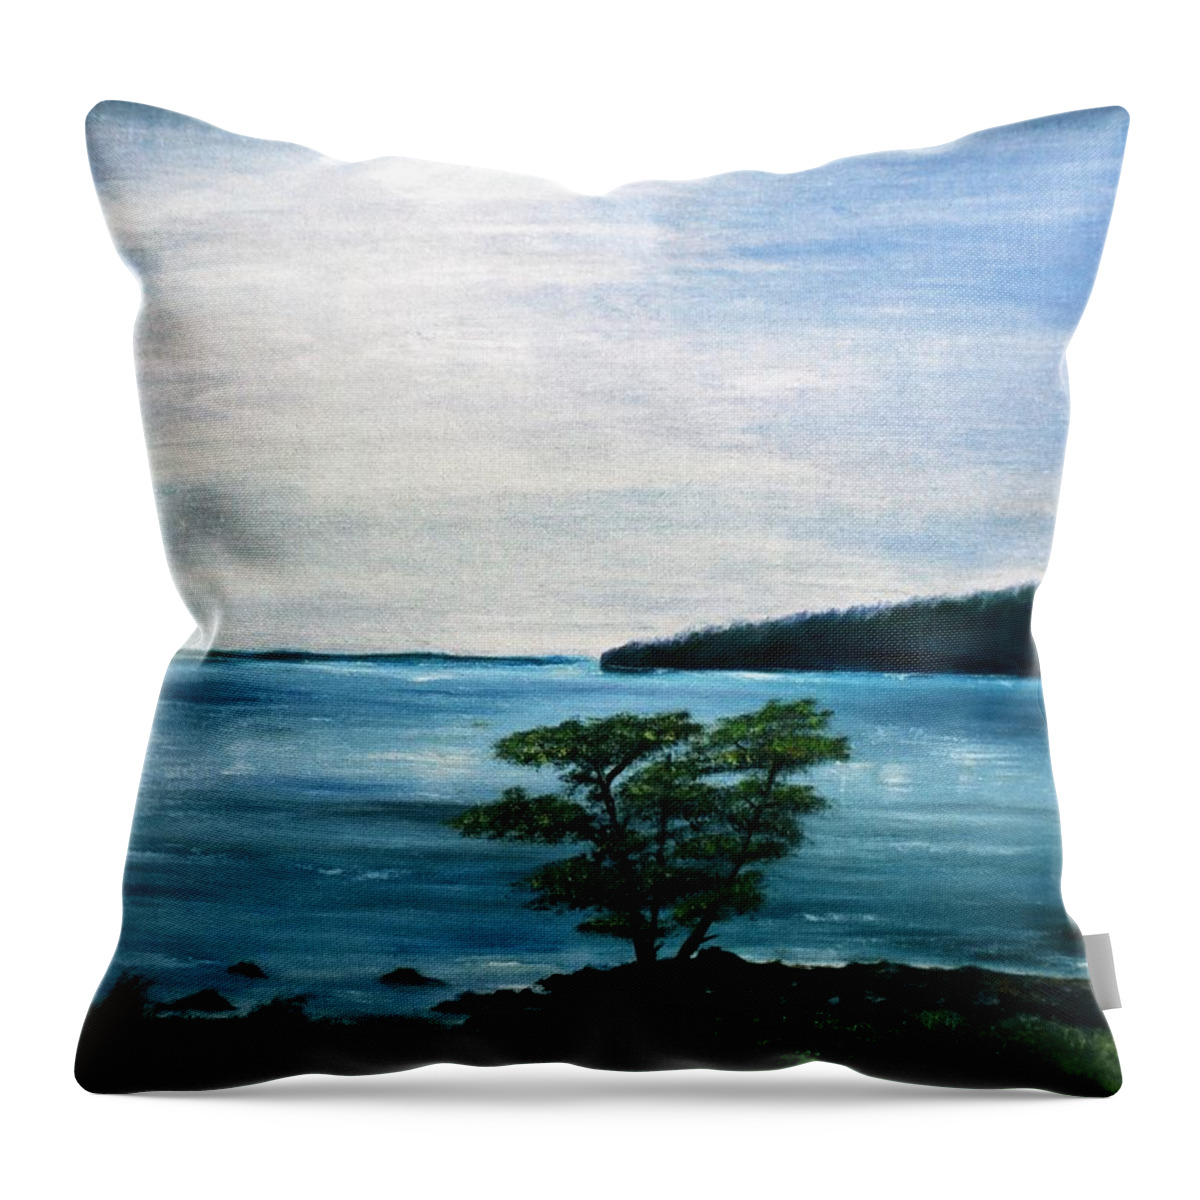 Edwards Throw Pillow featuring the painting The Picnic Area by Michael Anthony Edwards